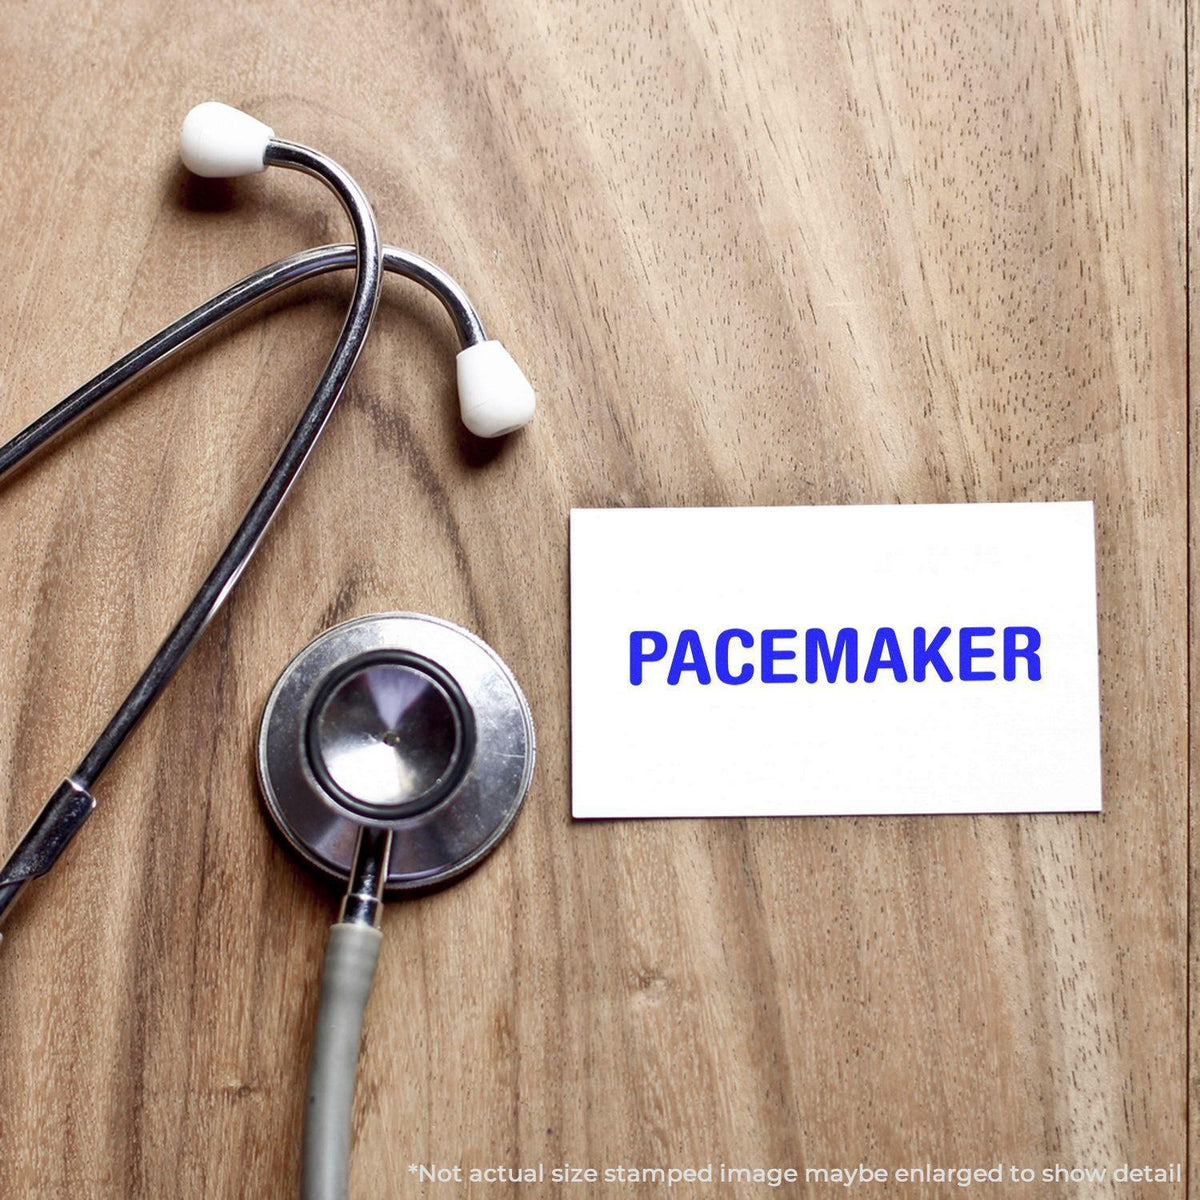 Large Pacemaker Rubber Stamp In Use Photo